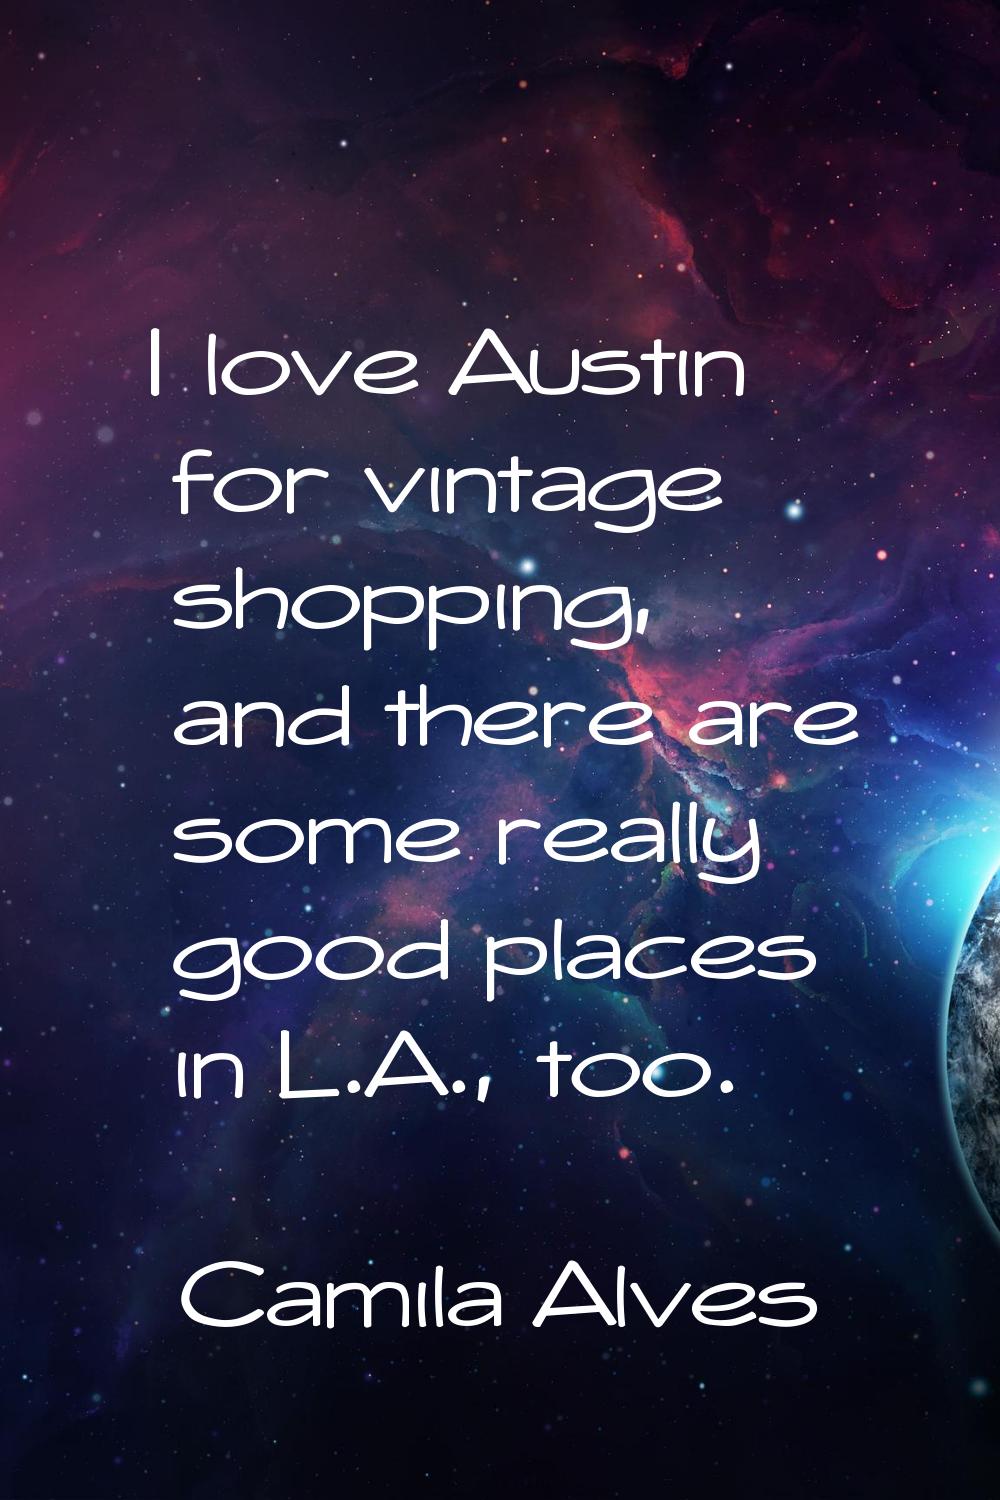 I love Austin for vintage shopping, and there are some really good places in L.A., too.